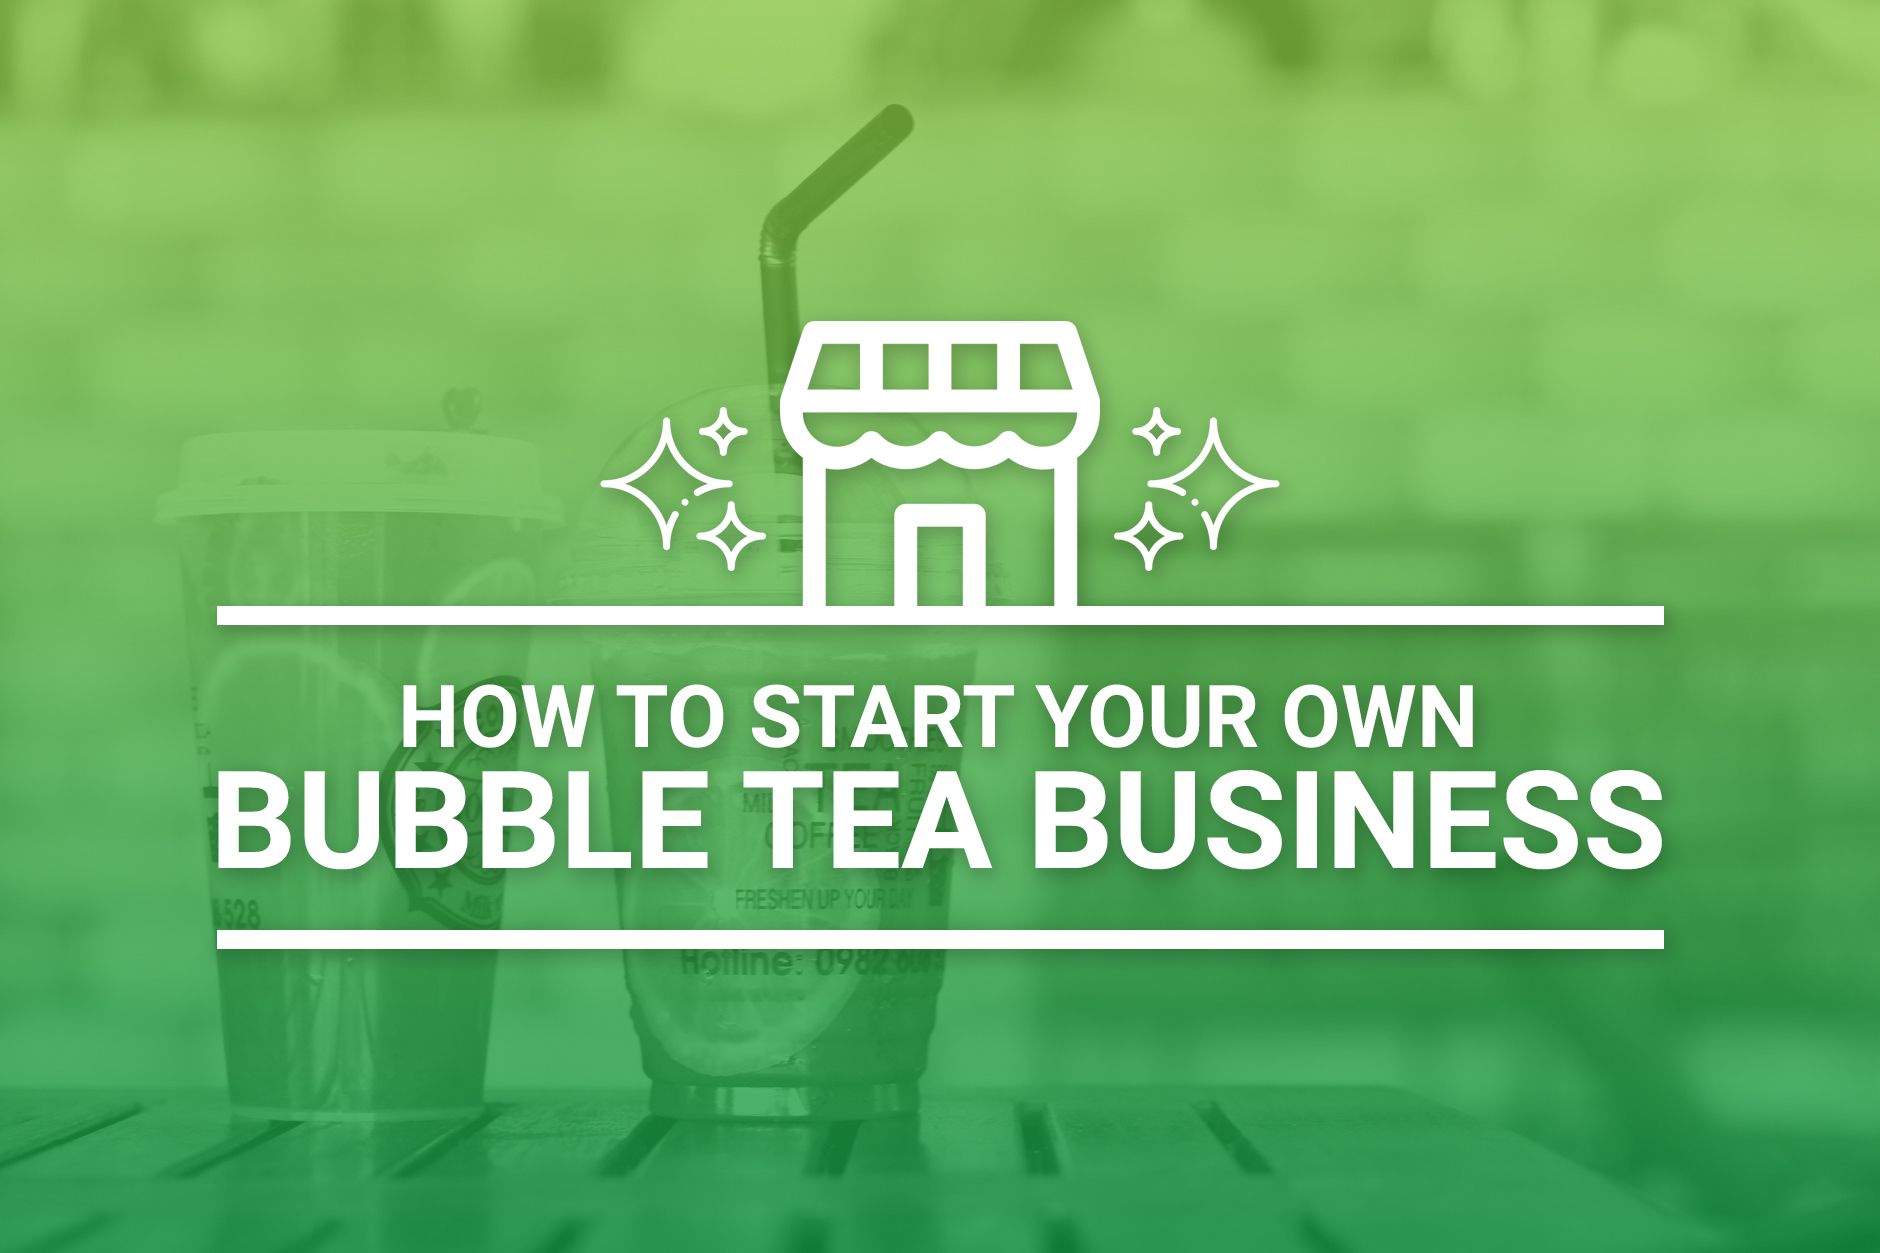 How To Start A Bubble Tea Business